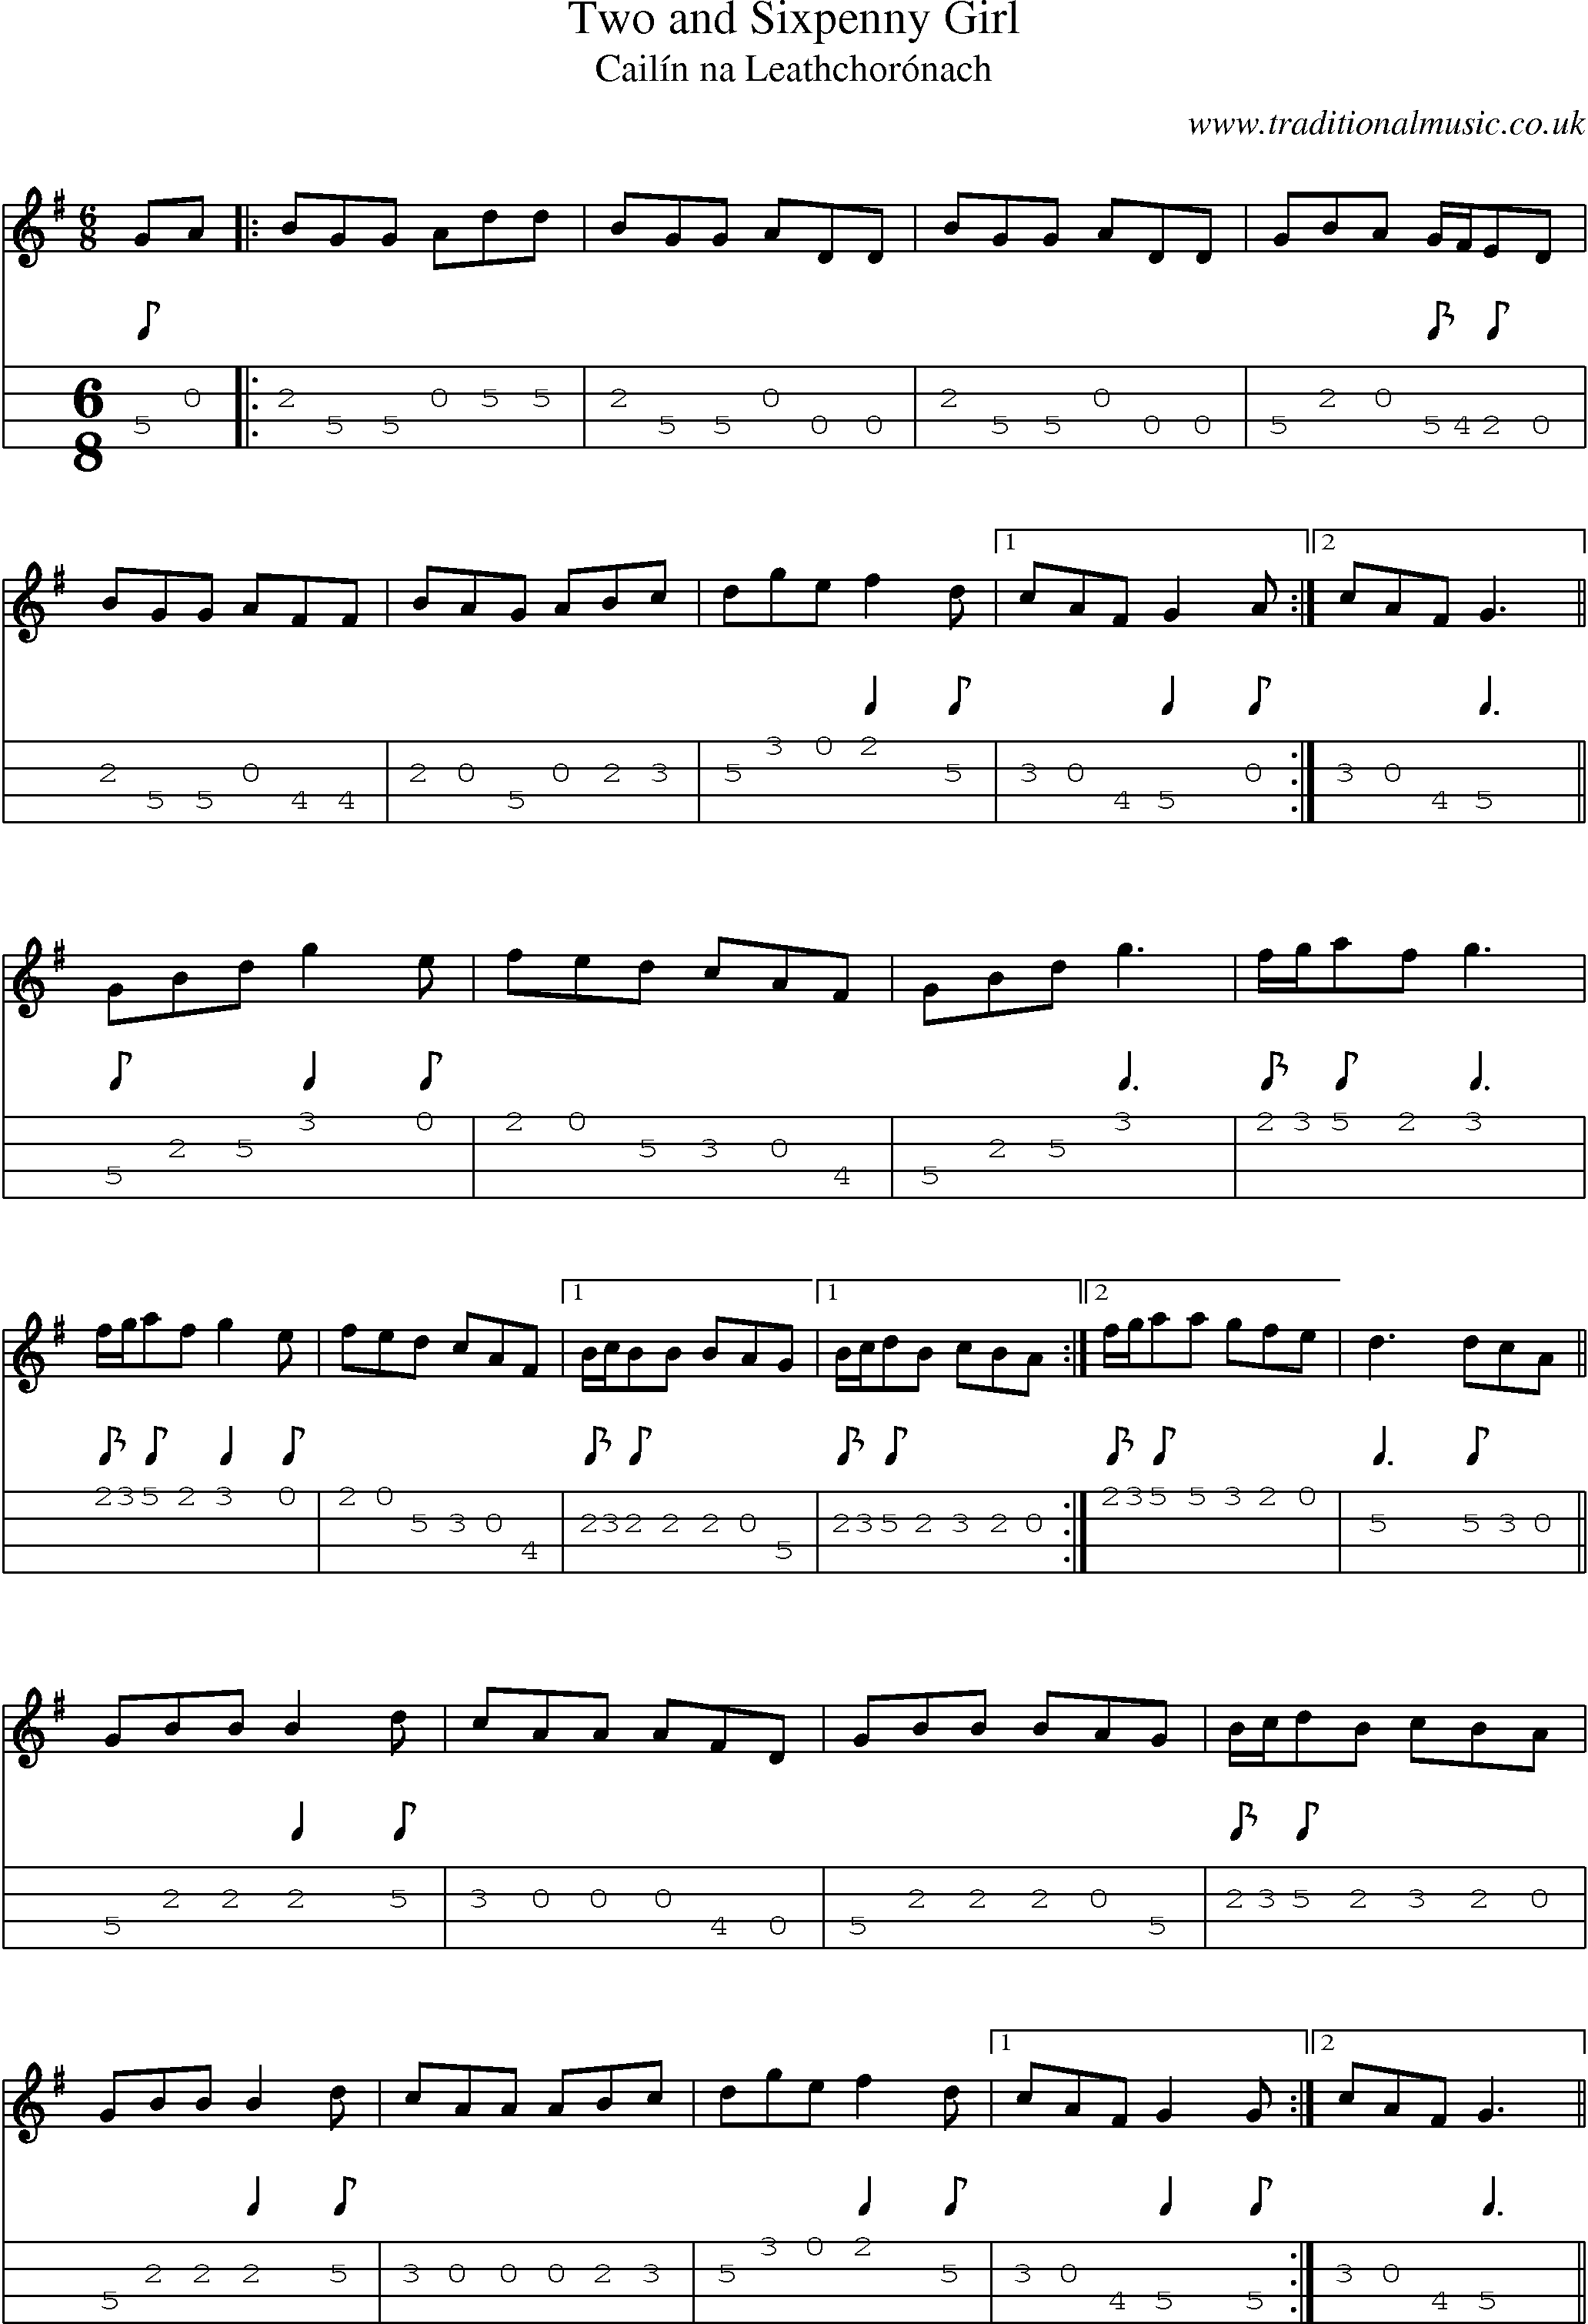 Music Score and Mandolin Tabs for Two And Sixpenny Girl